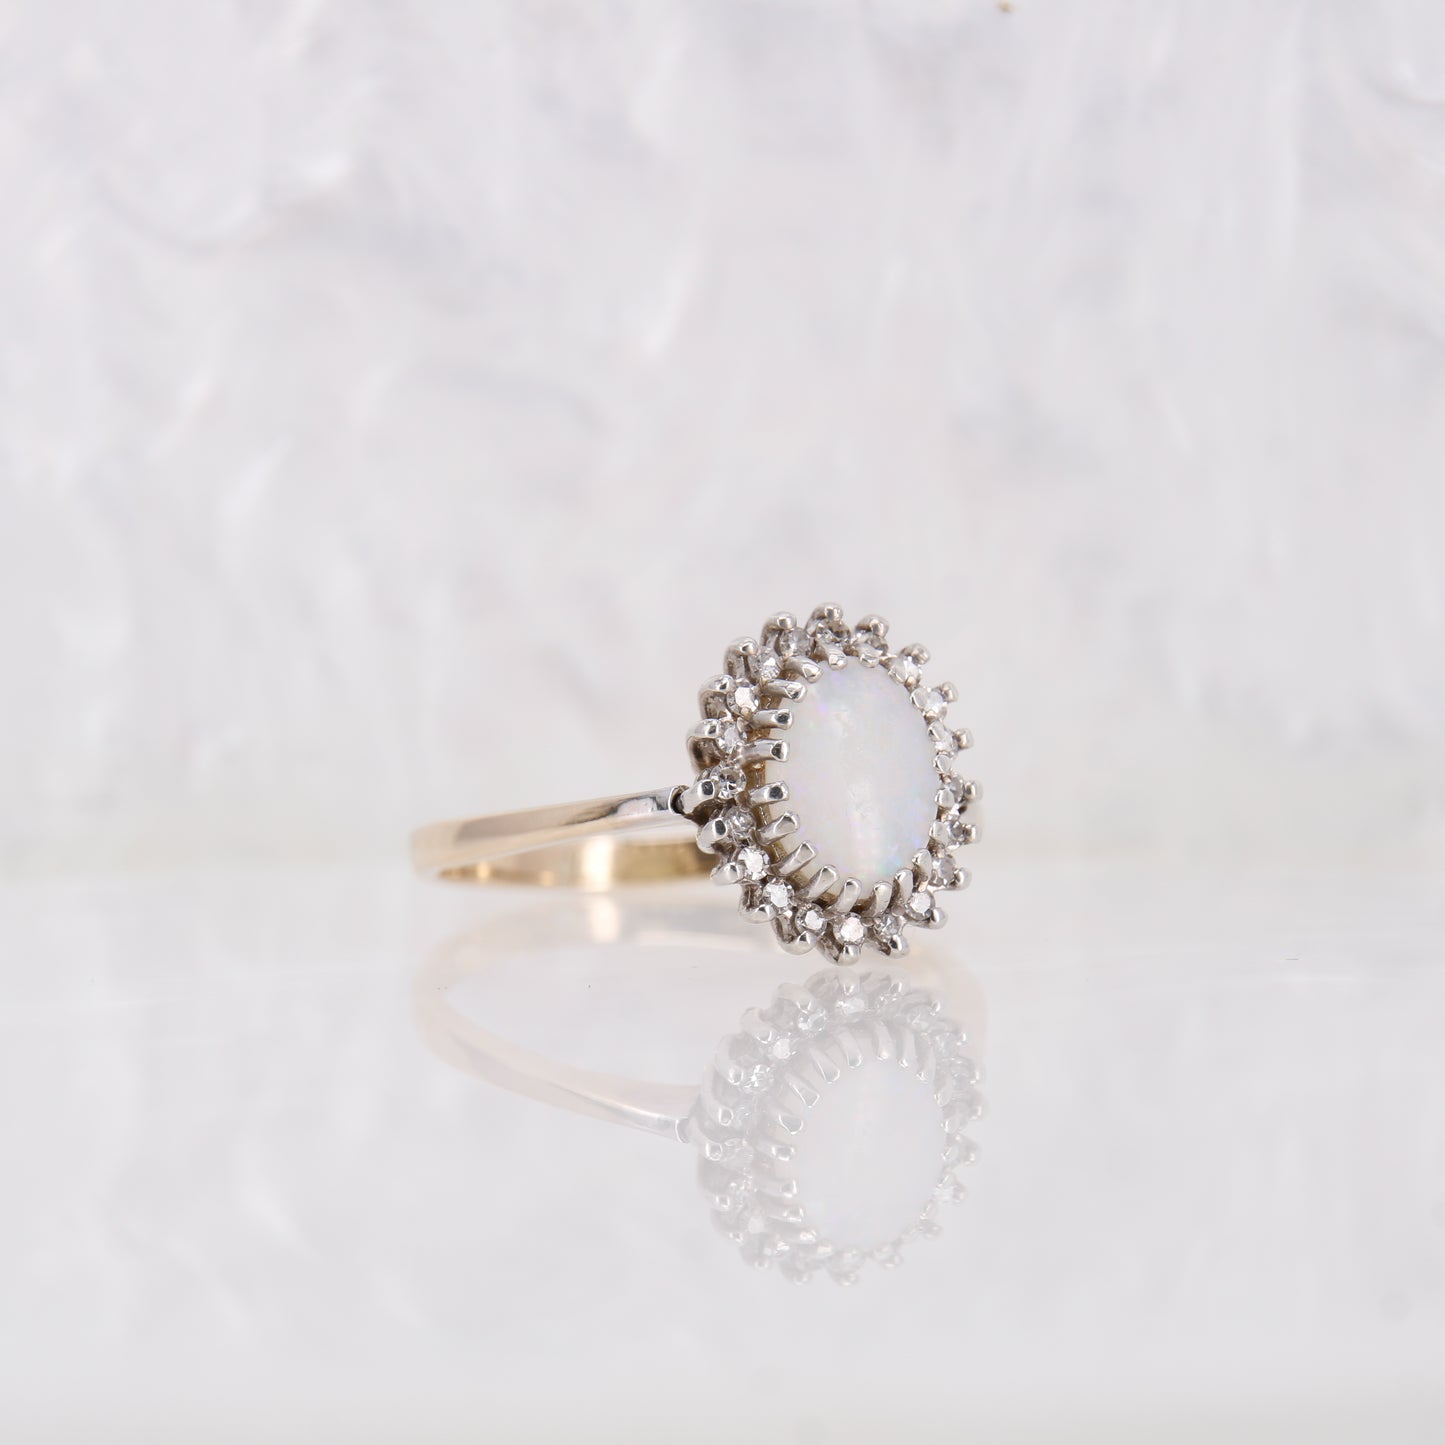 Vintage Opal and Diamond Ring in yellow gold. Secondhand white opal ring with a halo of diamonds.